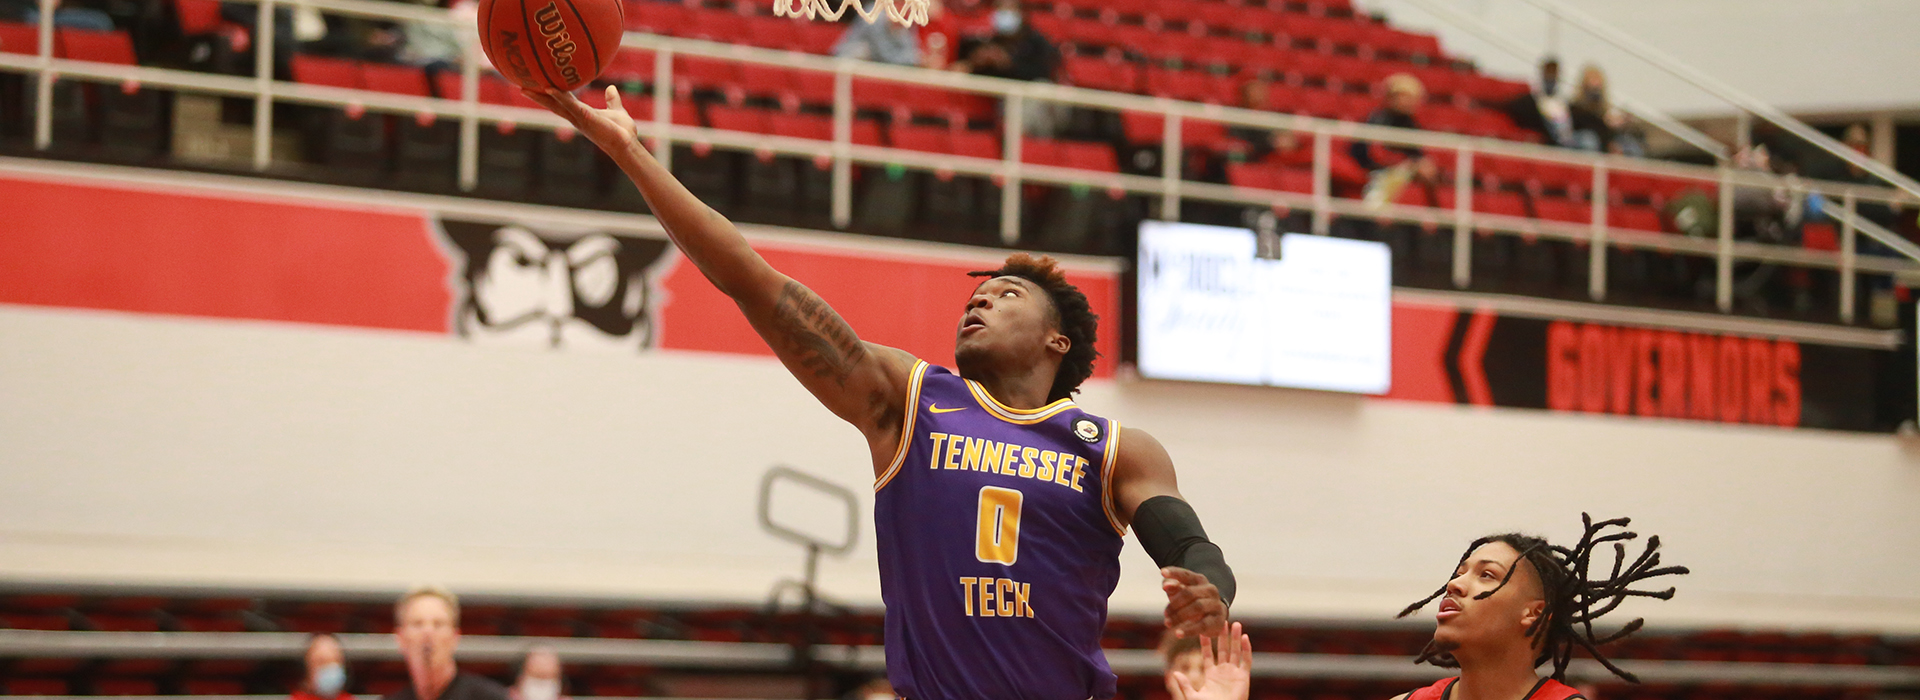 Tech men's basketball team set for rematch with EKU on Monday at 6 PM